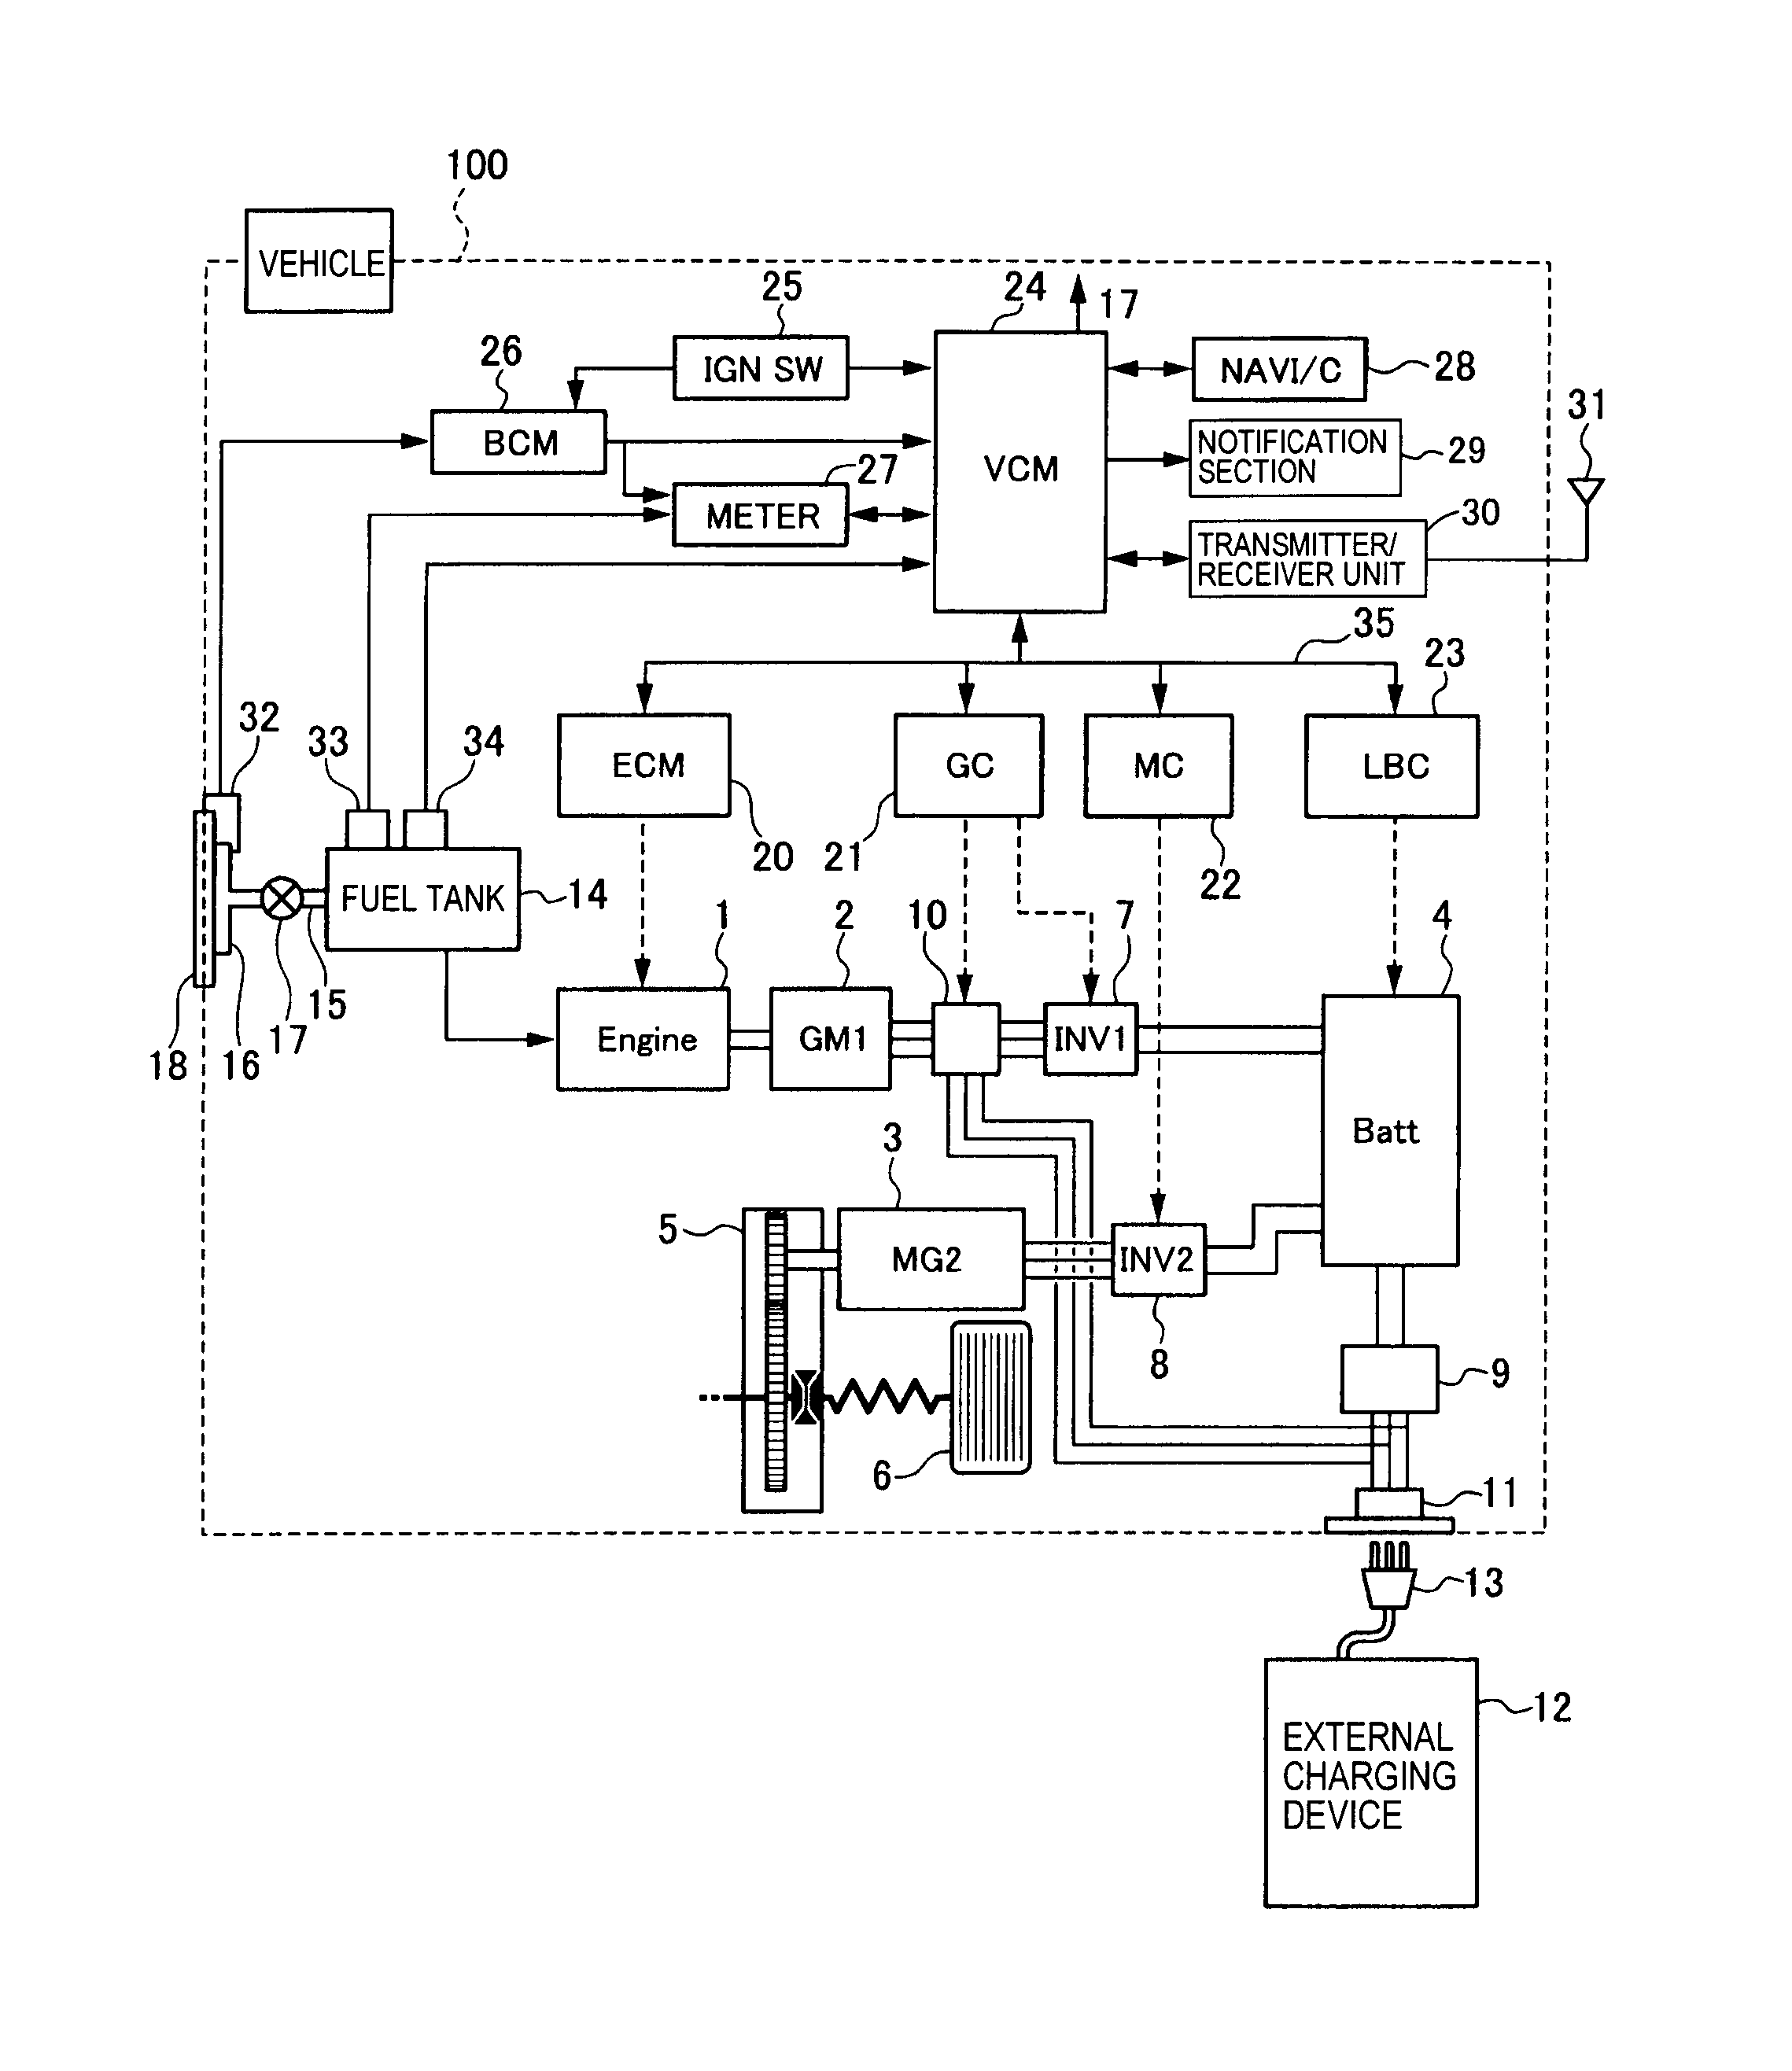 autopage rs 730 wiring diagram